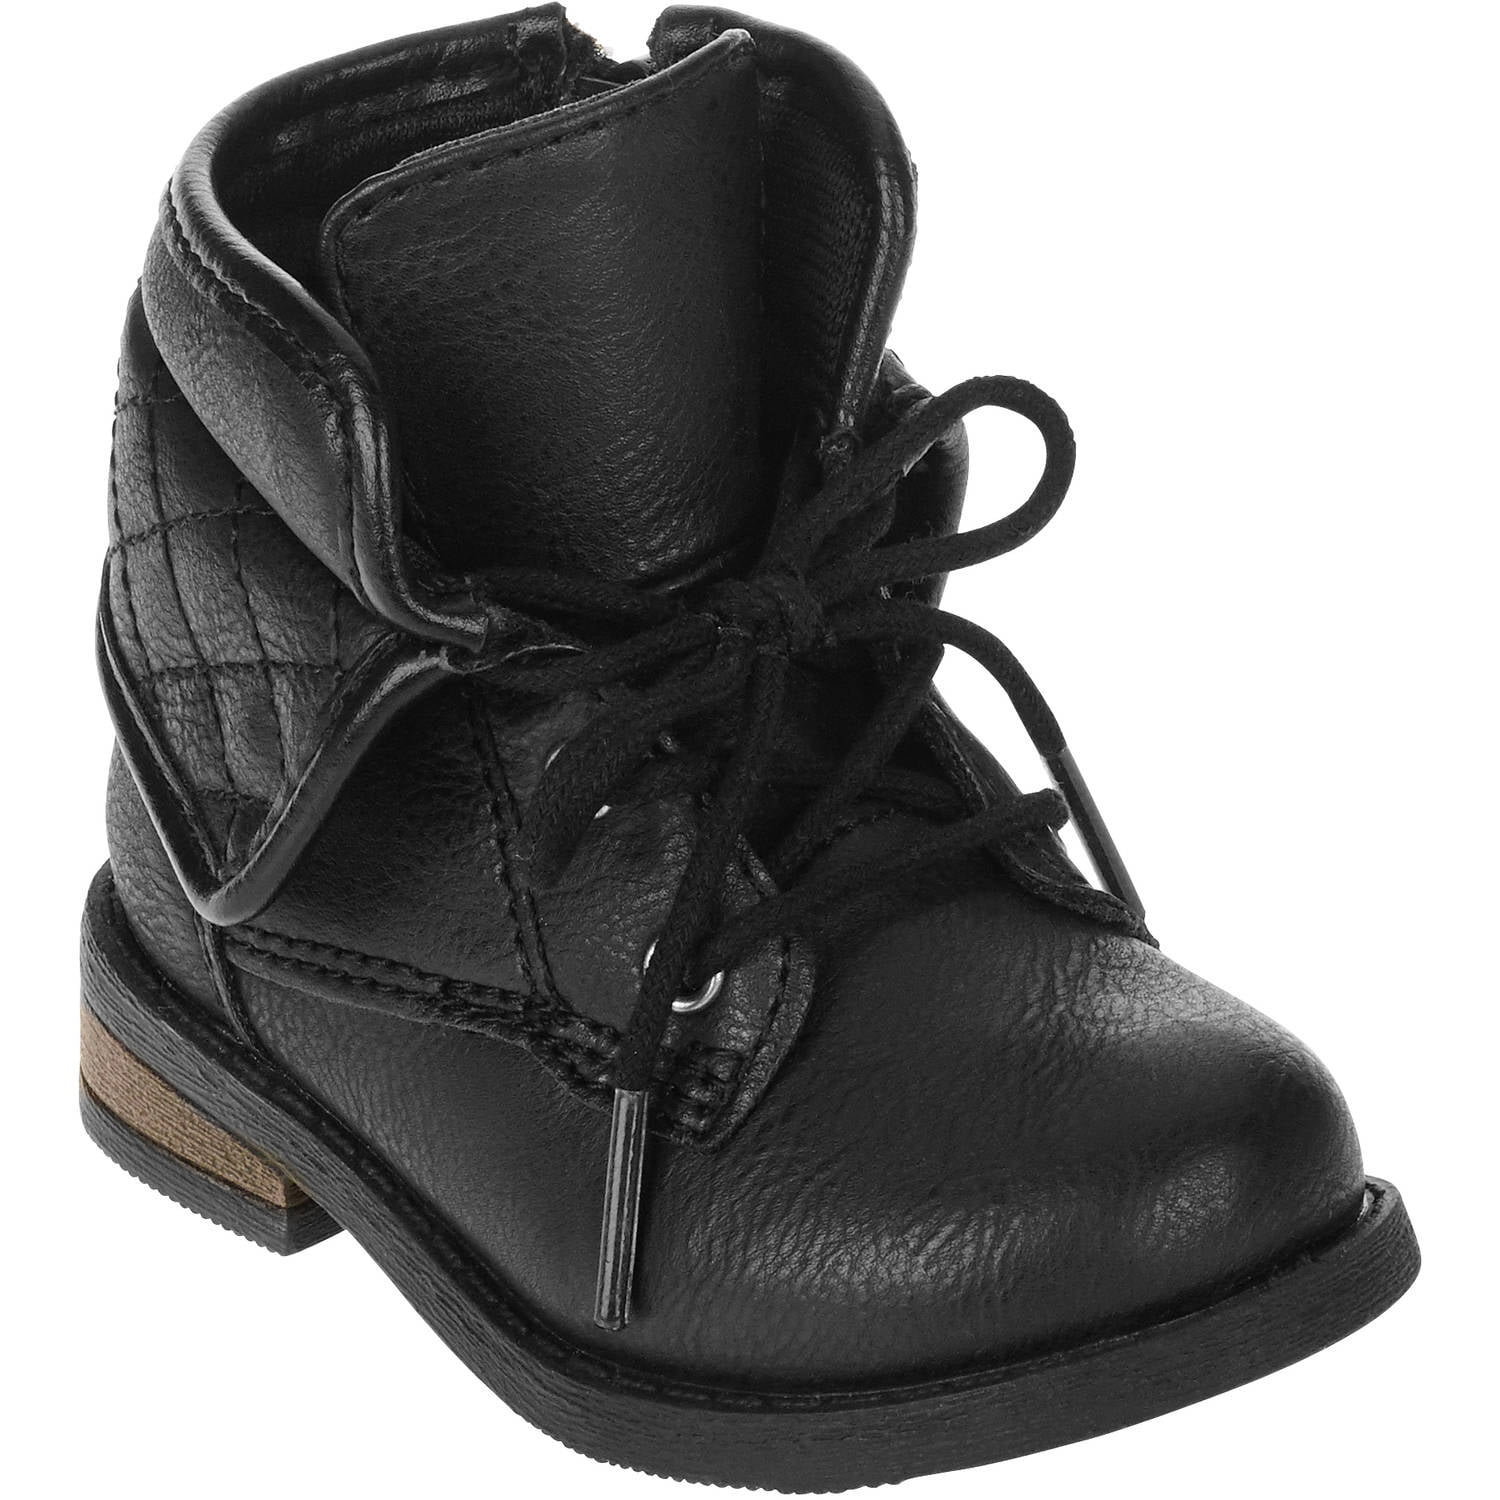 black boots for baby